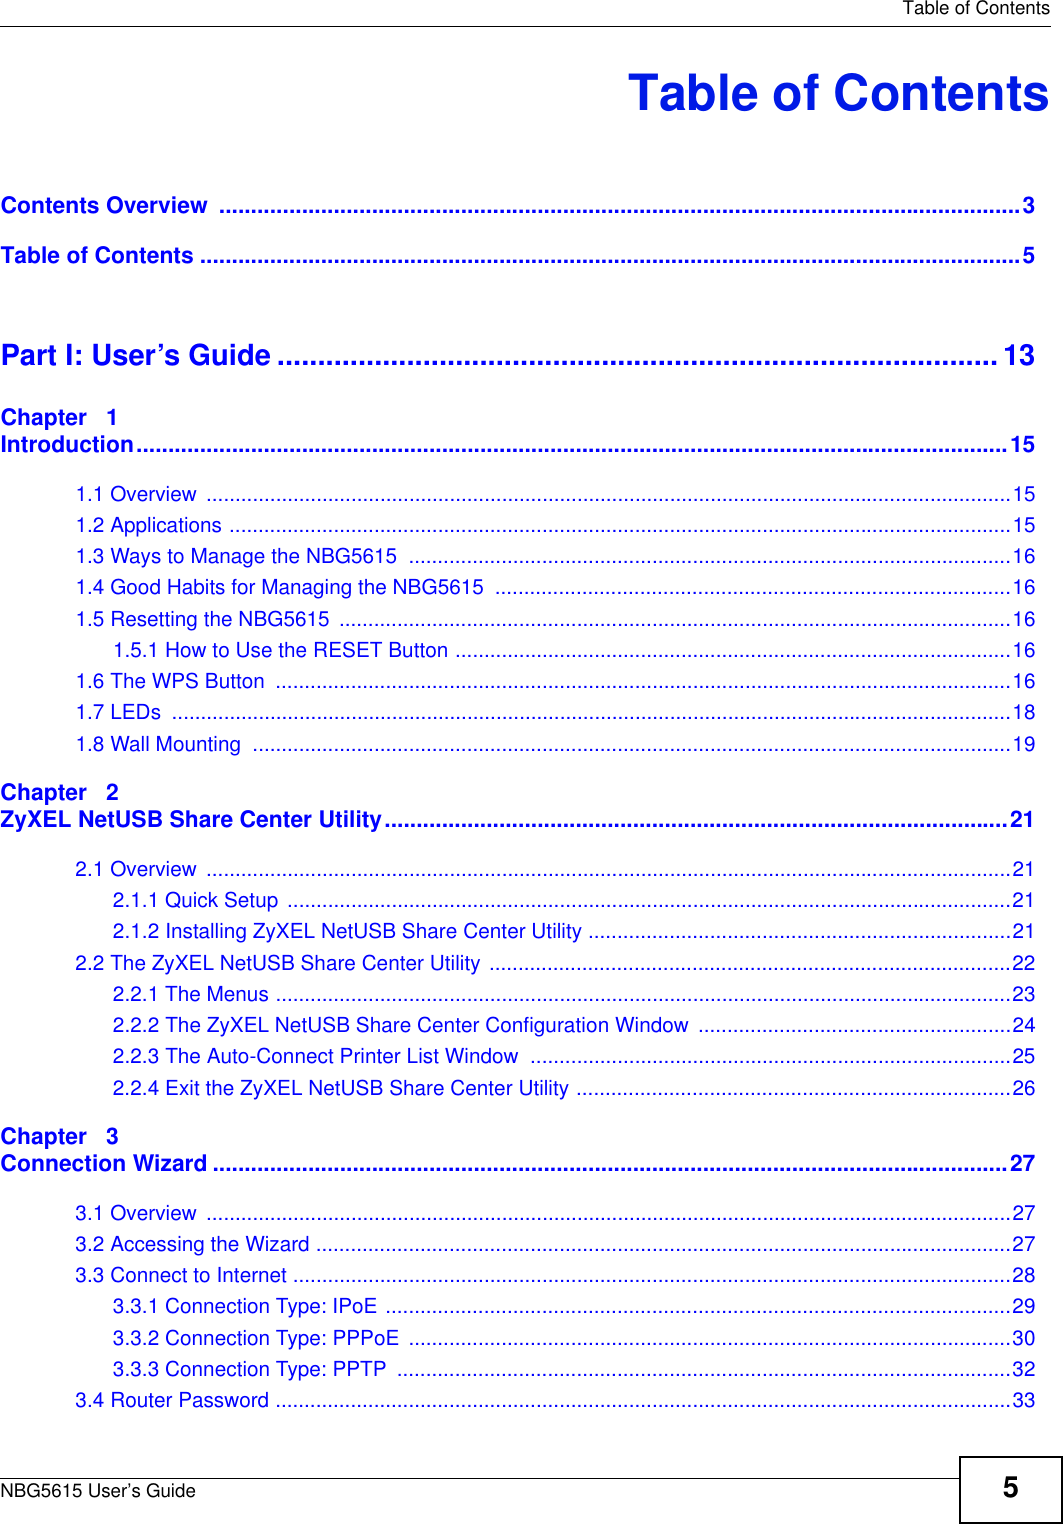   Table of ContentsNBG5615 User’s Guide 5Table of ContentsContents Overview  ..............................................................................................................................3Table of Contents .................................................................................................................................5Part I: User’s Guide ......................................................................................... 13Chapter   1Introduction.........................................................................................................................................151.1 Overview  ...........................................................................................................................................151.2 Applications .......................................................................................................................................151.3 Ways to Manage the NBG5615  ........................................................................................................161.4 Good Habits for Managing the NBG5615  .........................................................................................161.5 Resetting the NBG5615  ....................................................................................................................161.5.1 How to Use the RESET Button ................................................................................................161.6 The WPS Button  ...............................................................................................................................161.7 LEDs  .................................................................................................................................................181.8 Wall Mounting  ...................................................................................................................................19Chapter   2ZyXEL NetUSB Share Center Utility..................................................................................................212.1 Overview  ...........................................................................................................................................212.1.1 Quick Setup  .............................................................................................................................212.1.2 Installing ZyXEL NetUSB Share Center Utility .........................................................................212.2 The ZyXEL NetUSB Share Center Utility ..........................................................................................222.2.1 The Menus ...............................................................................................................................232.2.2 The ZyXEL NetUSB Share Center Configuration Window  ......................................................242.2.3 The Auto-Connect Printer List Window  ...................................................................................252.2.4 Exit the ZyXEL NetUSB Share Center Utility ...........................................................................26Chapter   3Connection Wizard .............................................................................................................................273.1 Overview  ...........................................................................................................................................273.2 Accessing the Wizard ........................................................................................................................273.3 Connect to Internet ............................................................................................................................283.3.1 Connection Type: IPoE ............................................................................................................293.3.2 Connection Type: PPPoE  ........................................................................................................303.3.3 Connection Type: PPTP  ..........................................................................................................323.4 Router Password ...............................................................................................................................33